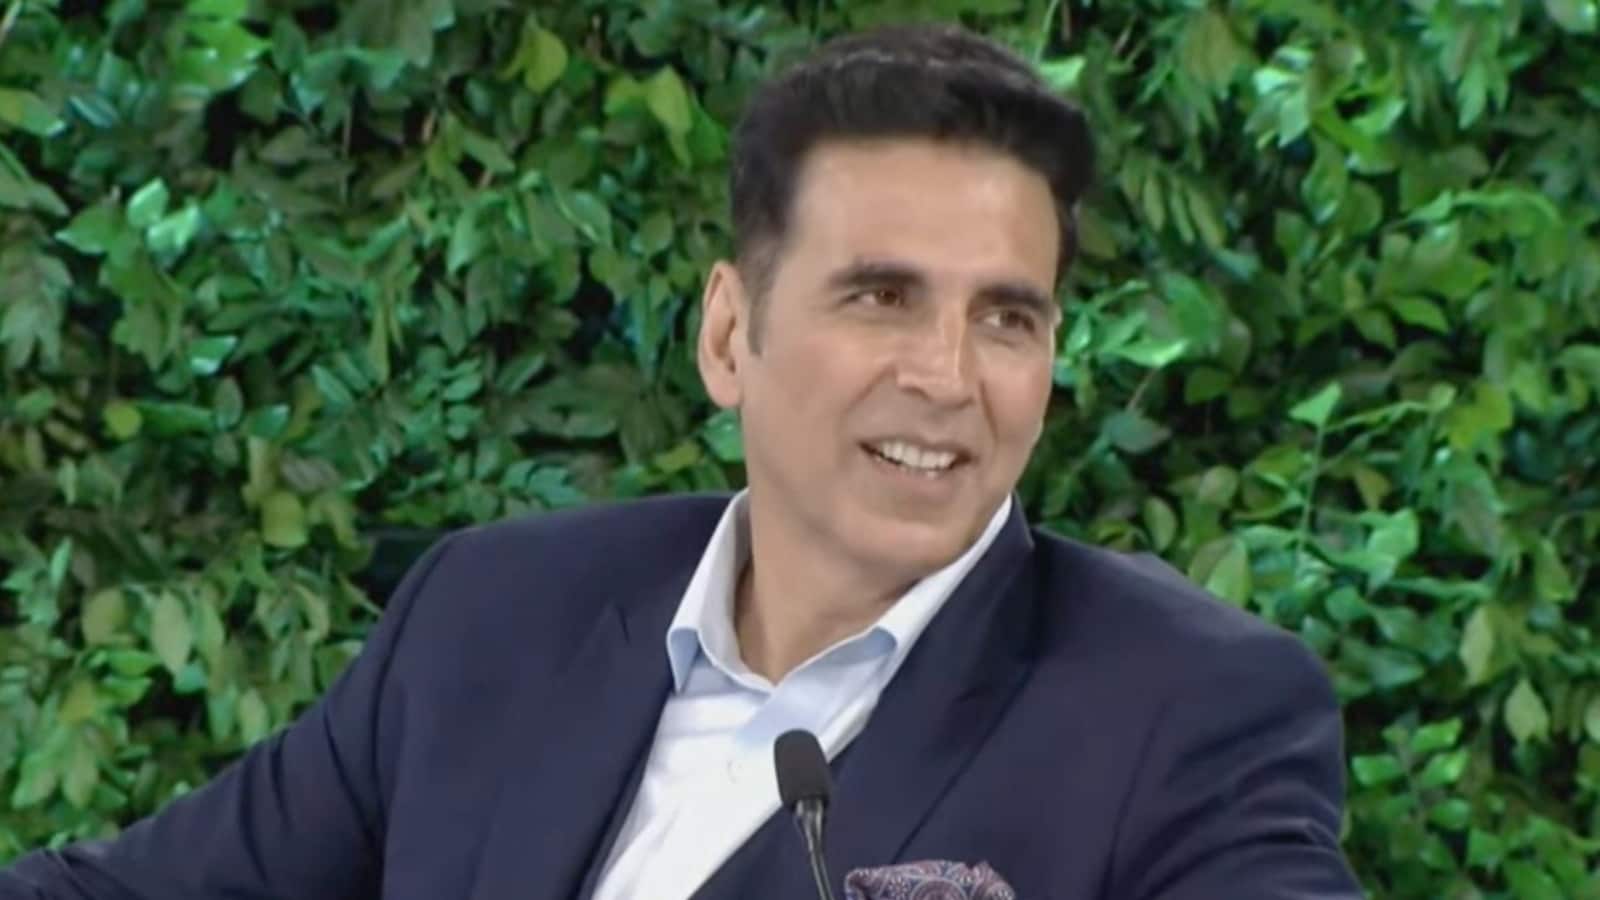 Very soon': Akshay Kumar gives update on his Indian passport application | Bollywood - Hindustan Times